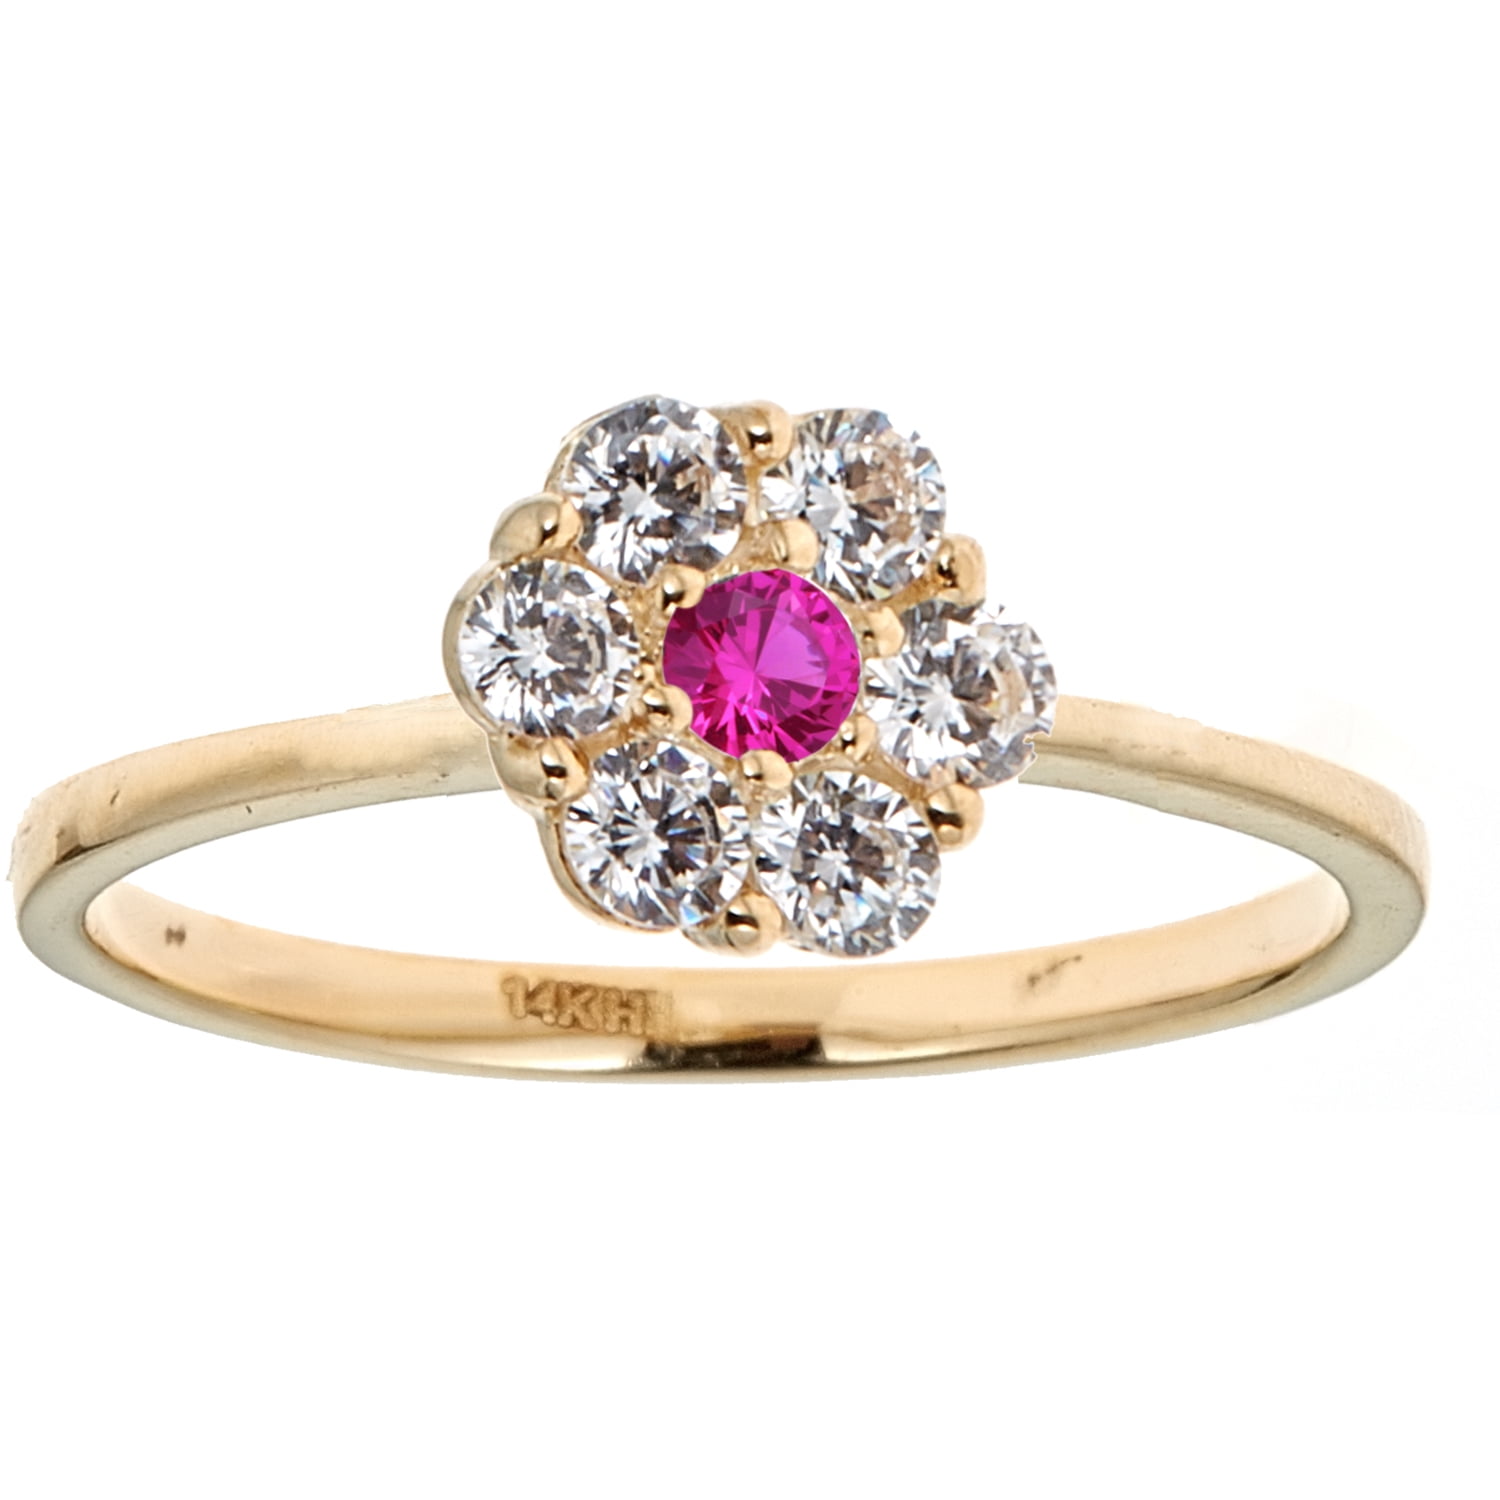 Children's 14k Solid Yellow Gold Pink White Cubic Zirconia Baby Ring Kids Size 3